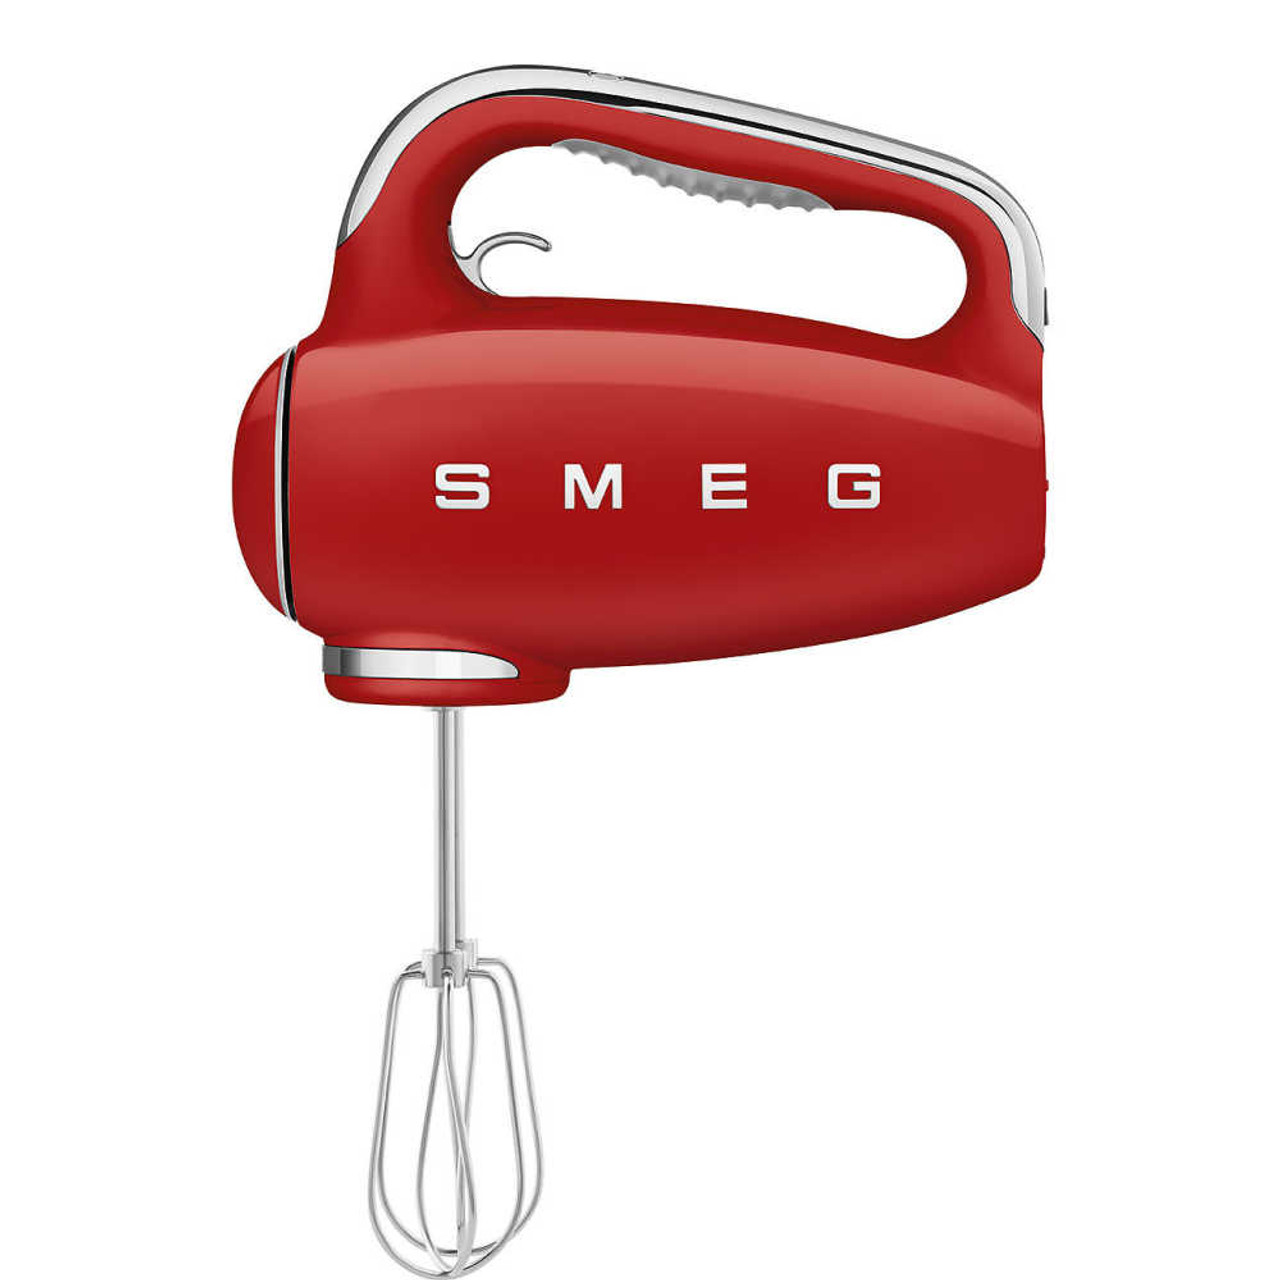 https://cdn11.bigcommerce.com/s-hccytny0od/images/stencil/1280x1280/products/4254/16128/smeg-hand-mixer-red__32759.1655576400.jpg?c=2?imbypass=on